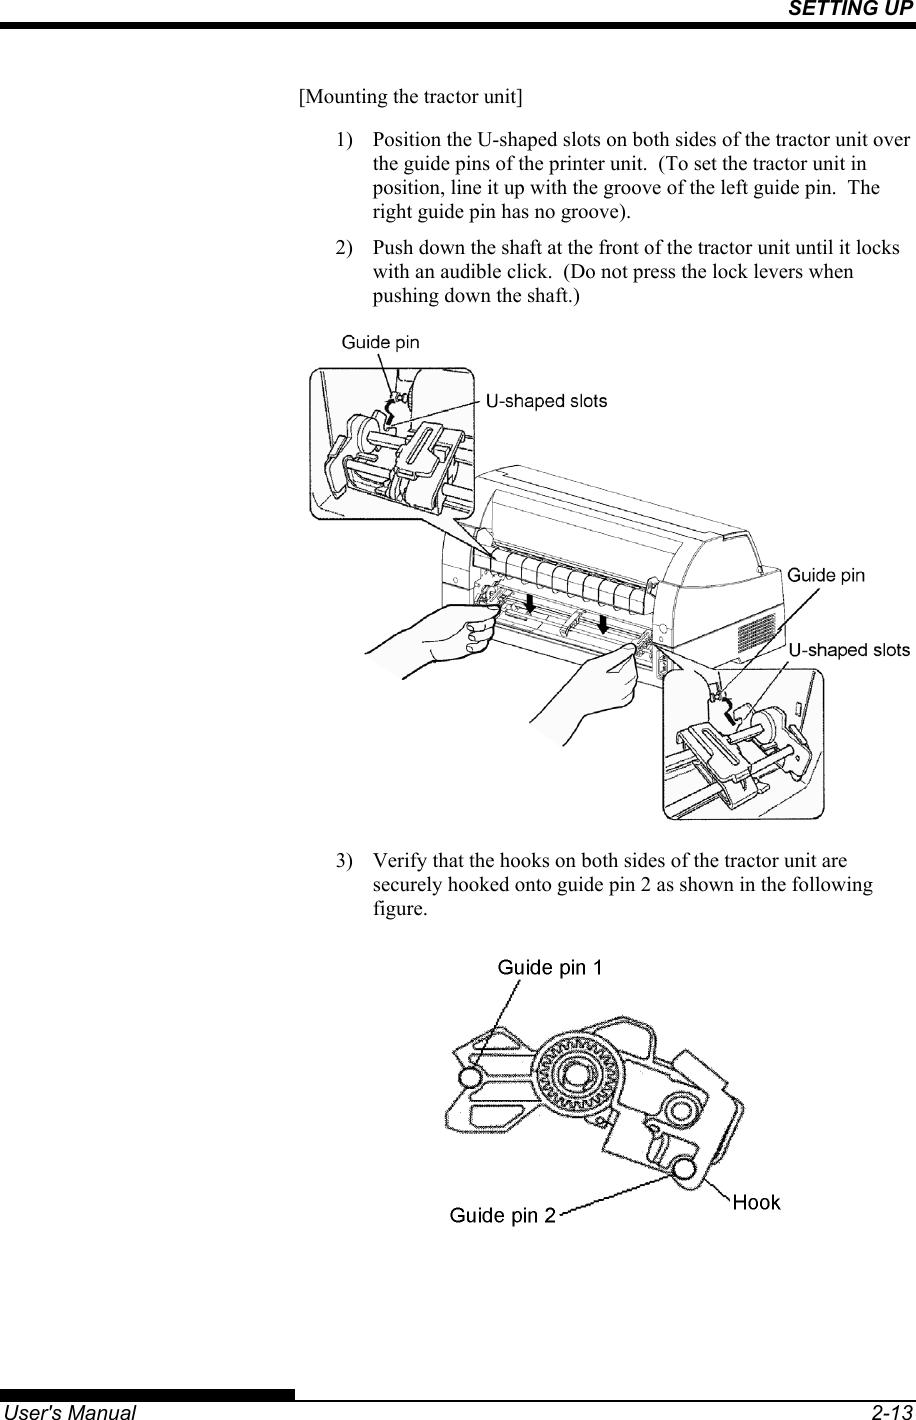 SETTING UP   User&apos;s Manual  2-13 [Mounting the tractor unit] 1)  Position the U-shaped slots on both sides of the tractor unit over the guide pins of the printer unit.  (To set the tractor unit in position, line it up with the groove of the left guide pin.  The right guide pin has no groove). 2)  Push down the shaft at the front of the tractor unit until it locks with an audible click.  (Do not press the lock levers when pushing down the shaft.)  3)  Verify that the hooks on both sides of the tractor unit are securely hooked onto guide pin 2 as shown in the following figure.   